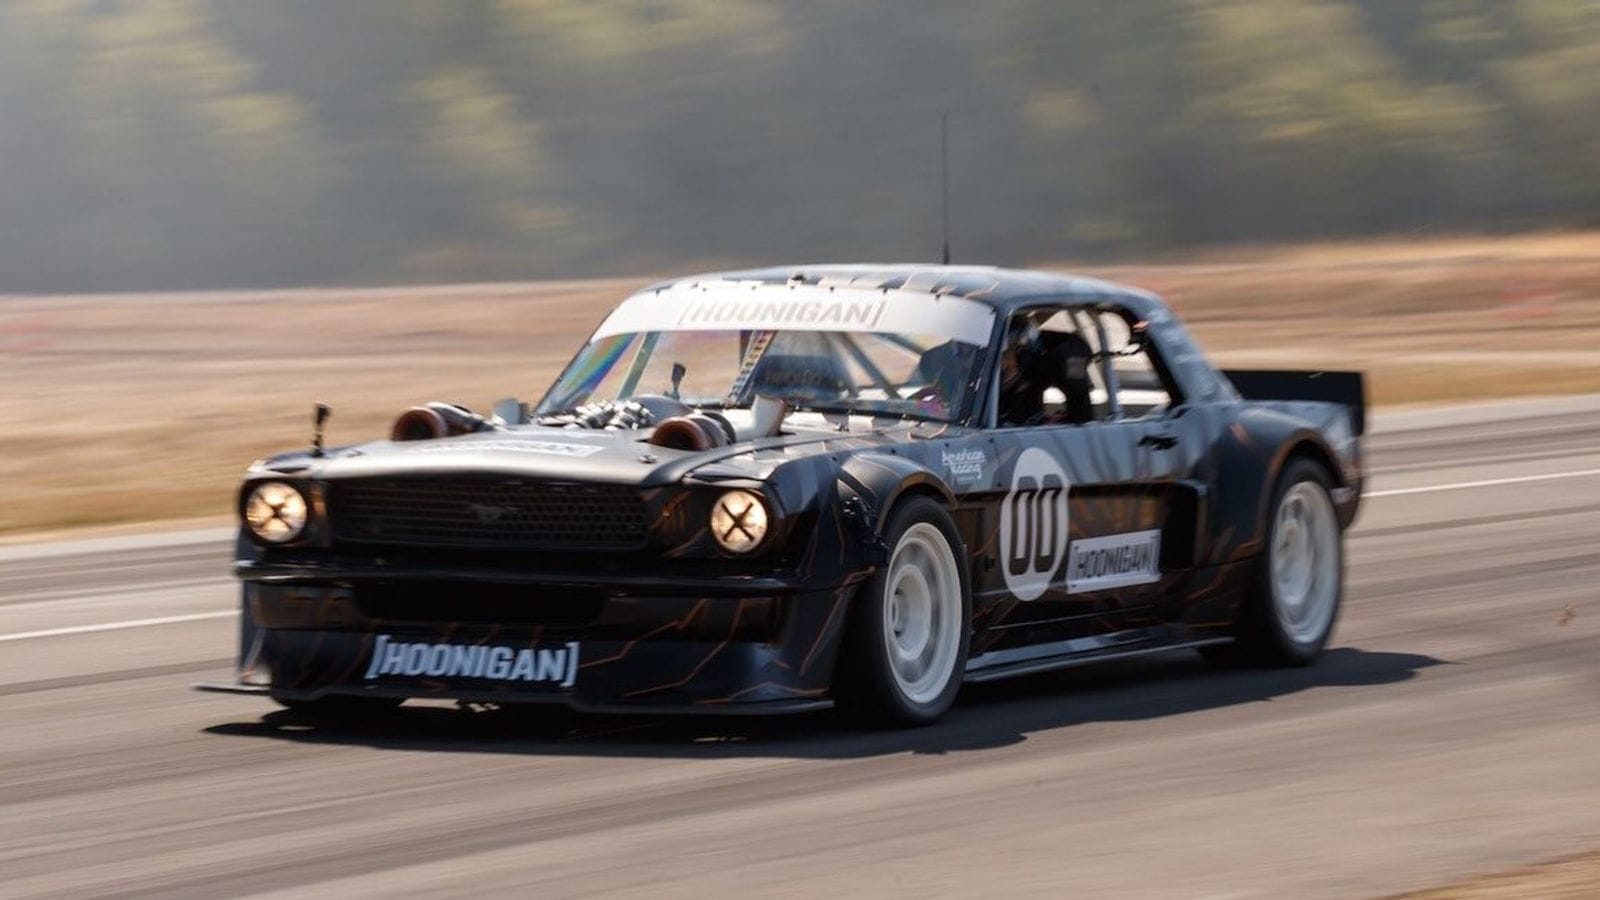 Iconic rally driver Ken Block lends 15-year-old daughter a 1,400 hp monster HT Auto